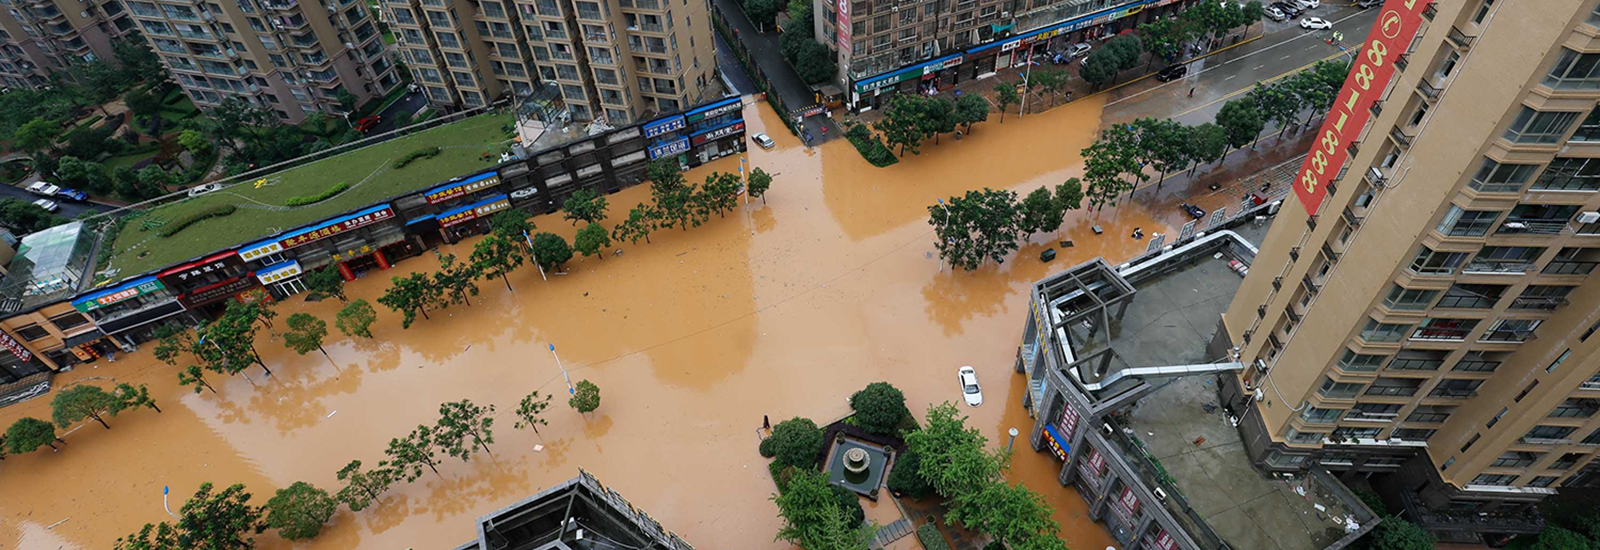 JIANGXI CHINA-June 19, 2016:members of the public in Jiujiang District Lian Road serious water street into a river, the roadside window car flooded, flooded, people travel disruption.